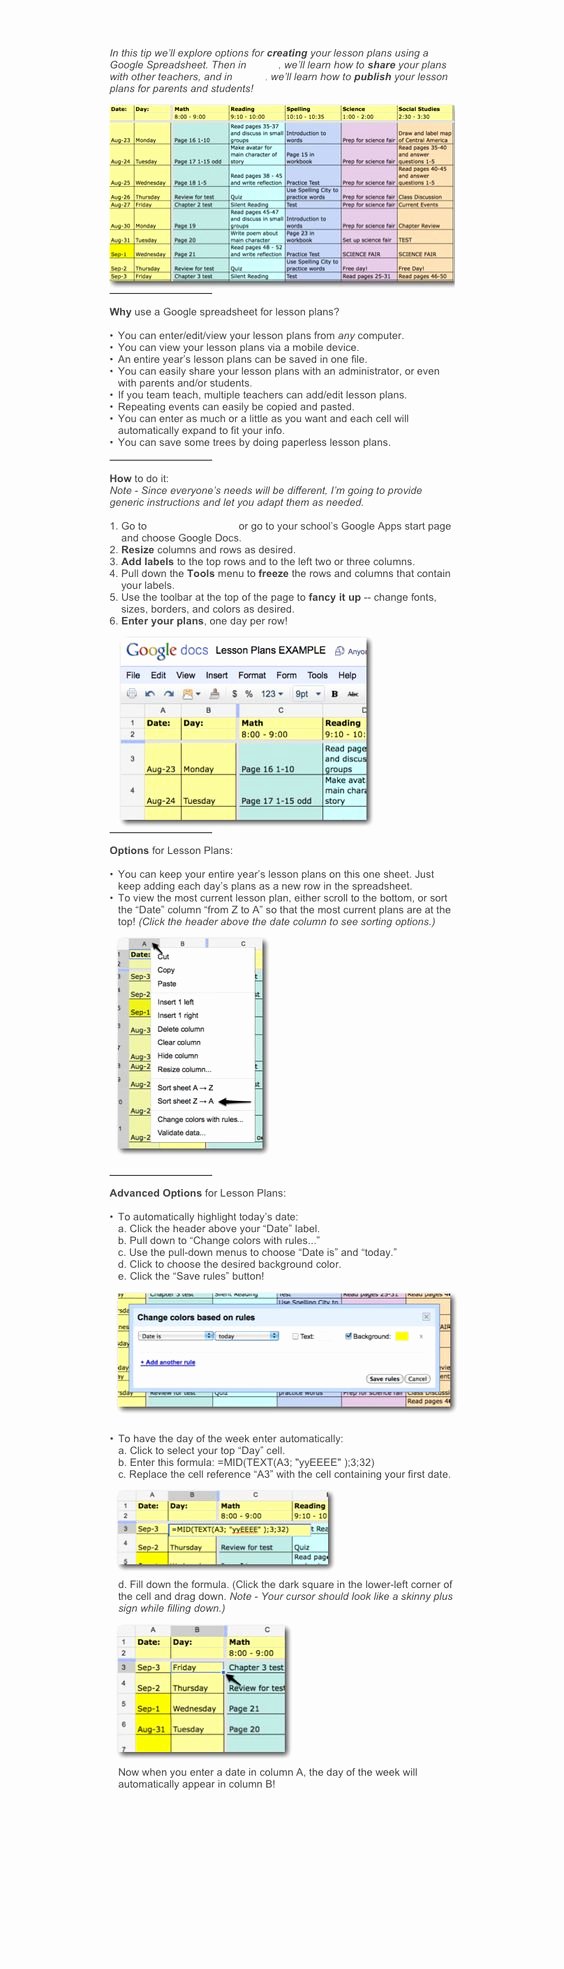 Lesson Plan Template Google Docs Awesome Google Docs Lesson Plans and Lesson Plan Books On Pinterest